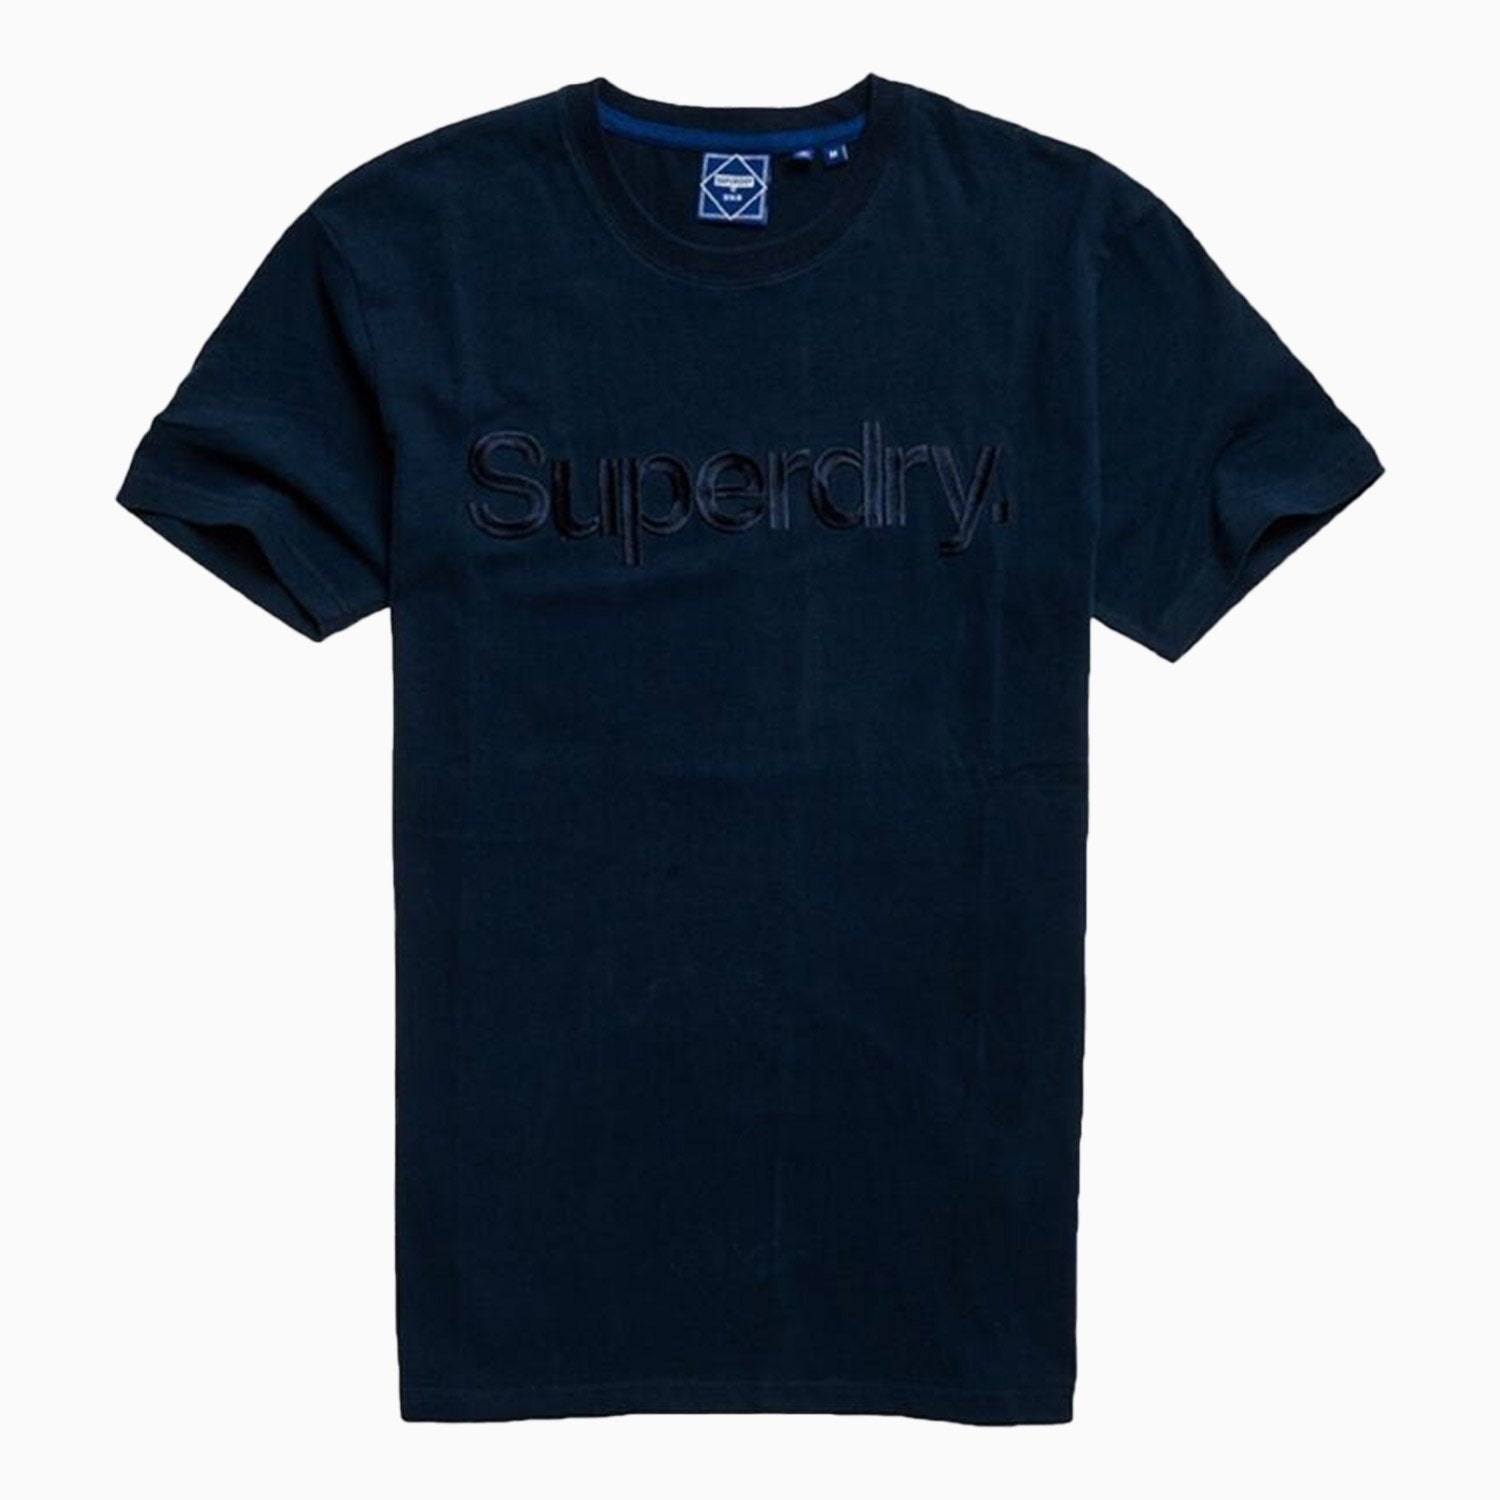 Superdry Men's Superdry Source 185 T-Shirt - Color: Eclipse Navy - Tops and Bottoms USA -